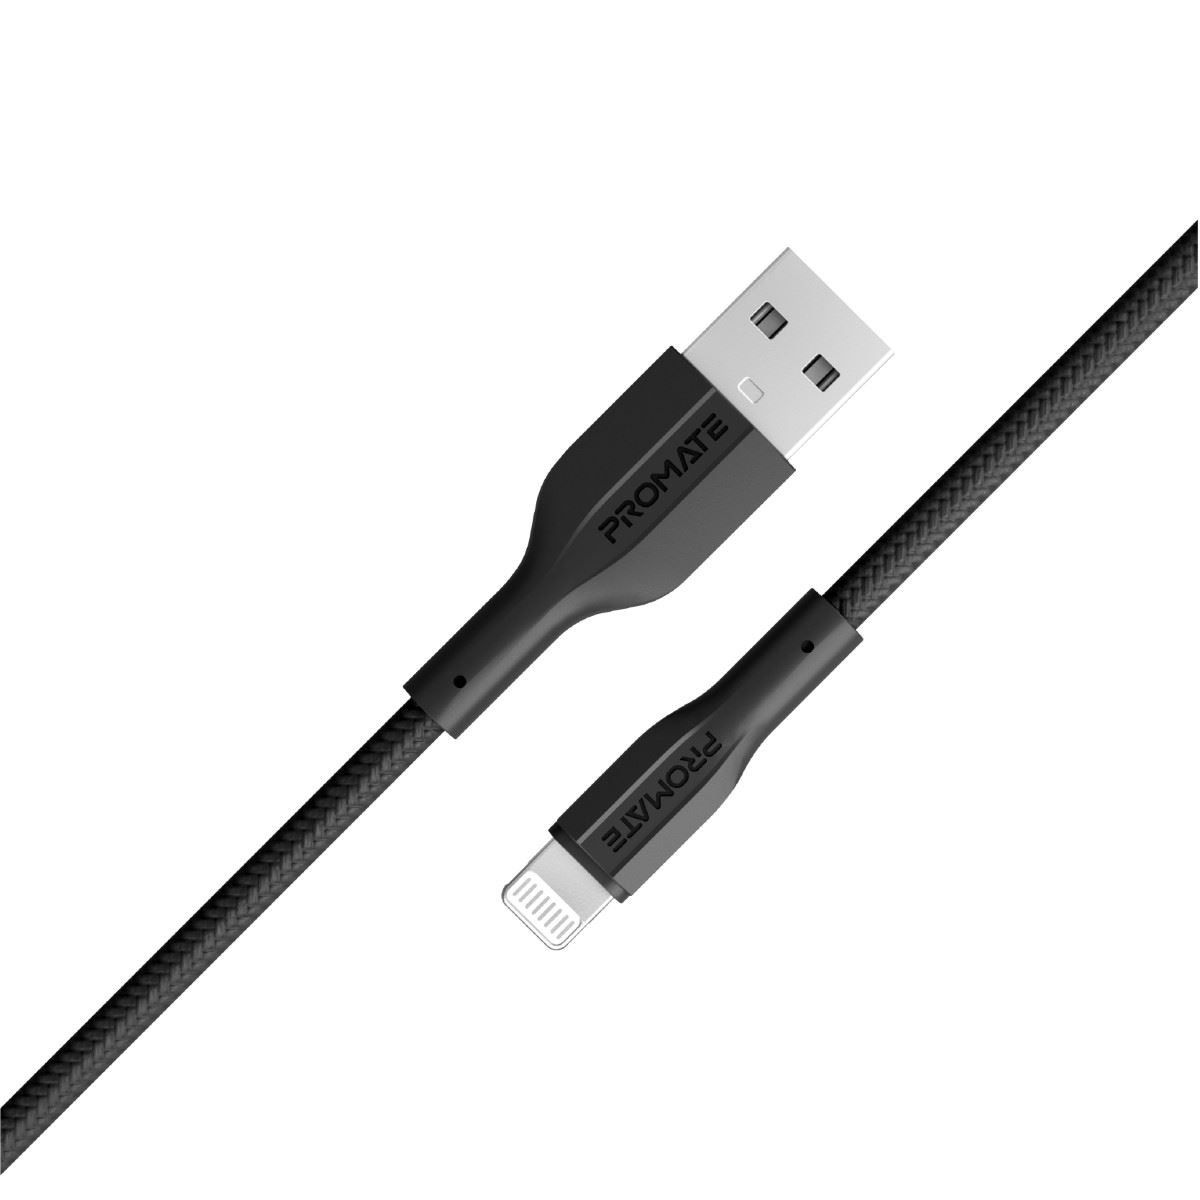 PROMATE 1M USB-A to Lightning Connector Super Flexible Cable. Supports 2A Charging & 480Mbps Data Transfer. Black Colour.